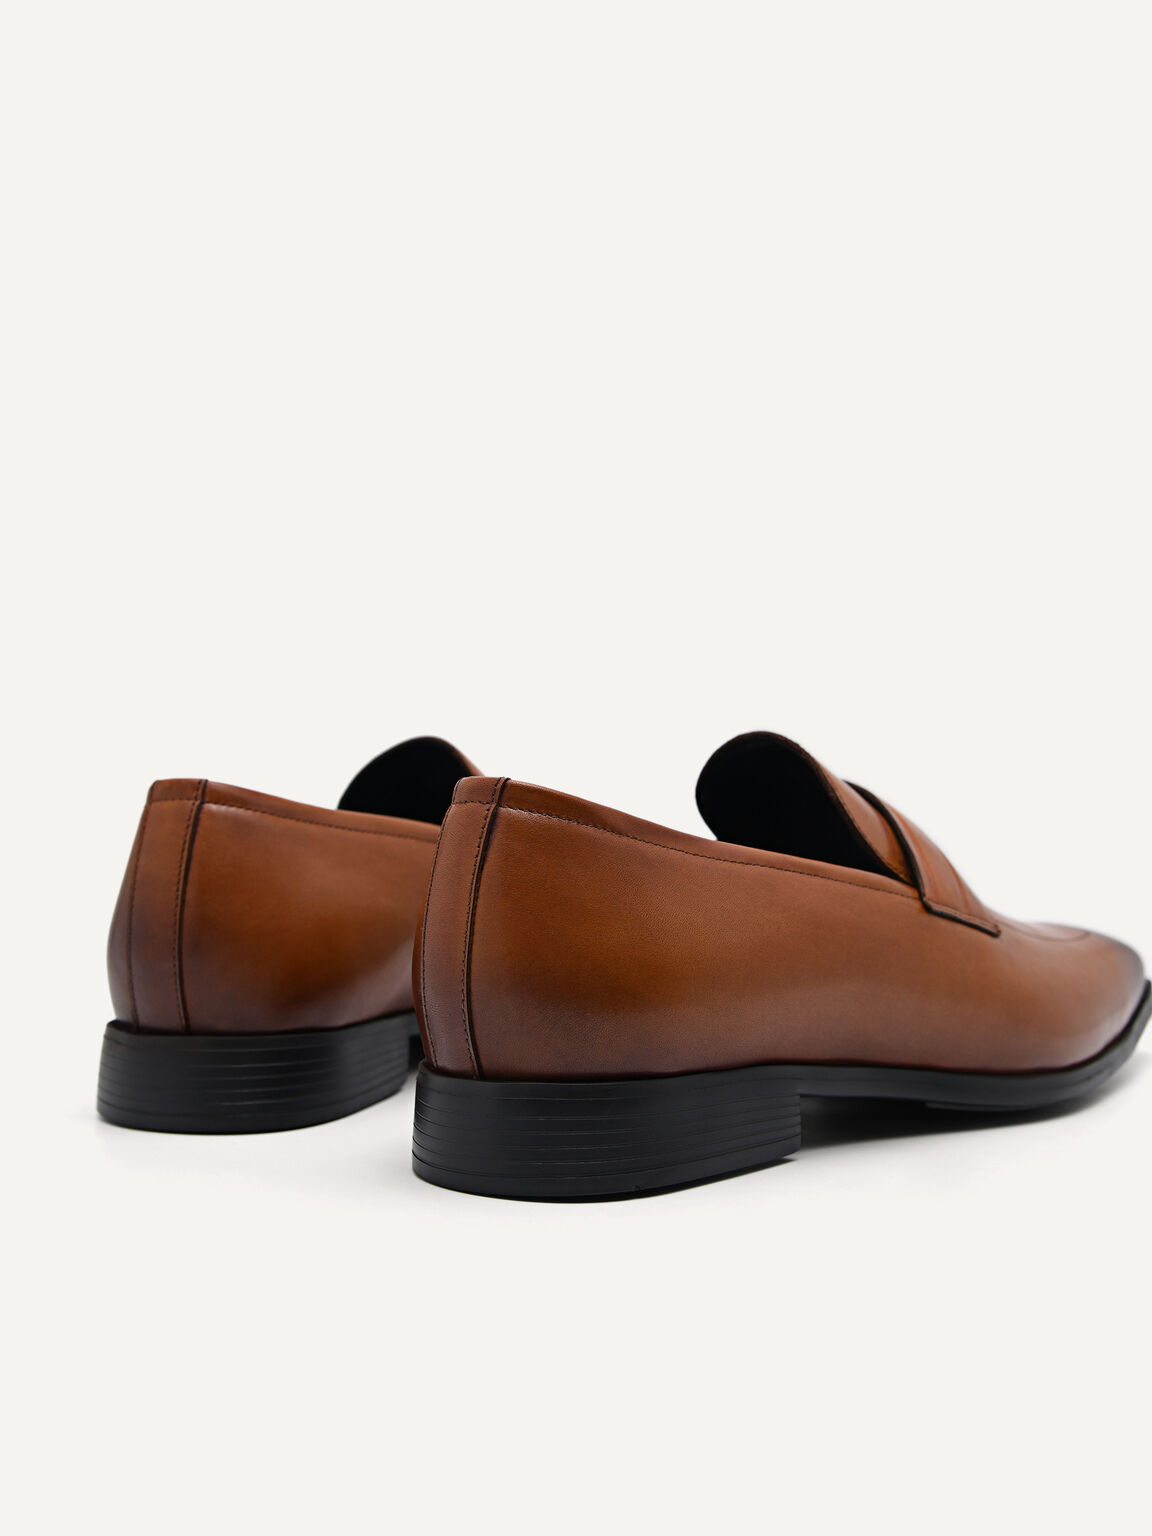 Altitude Lightweight Leather Loafers, Camel